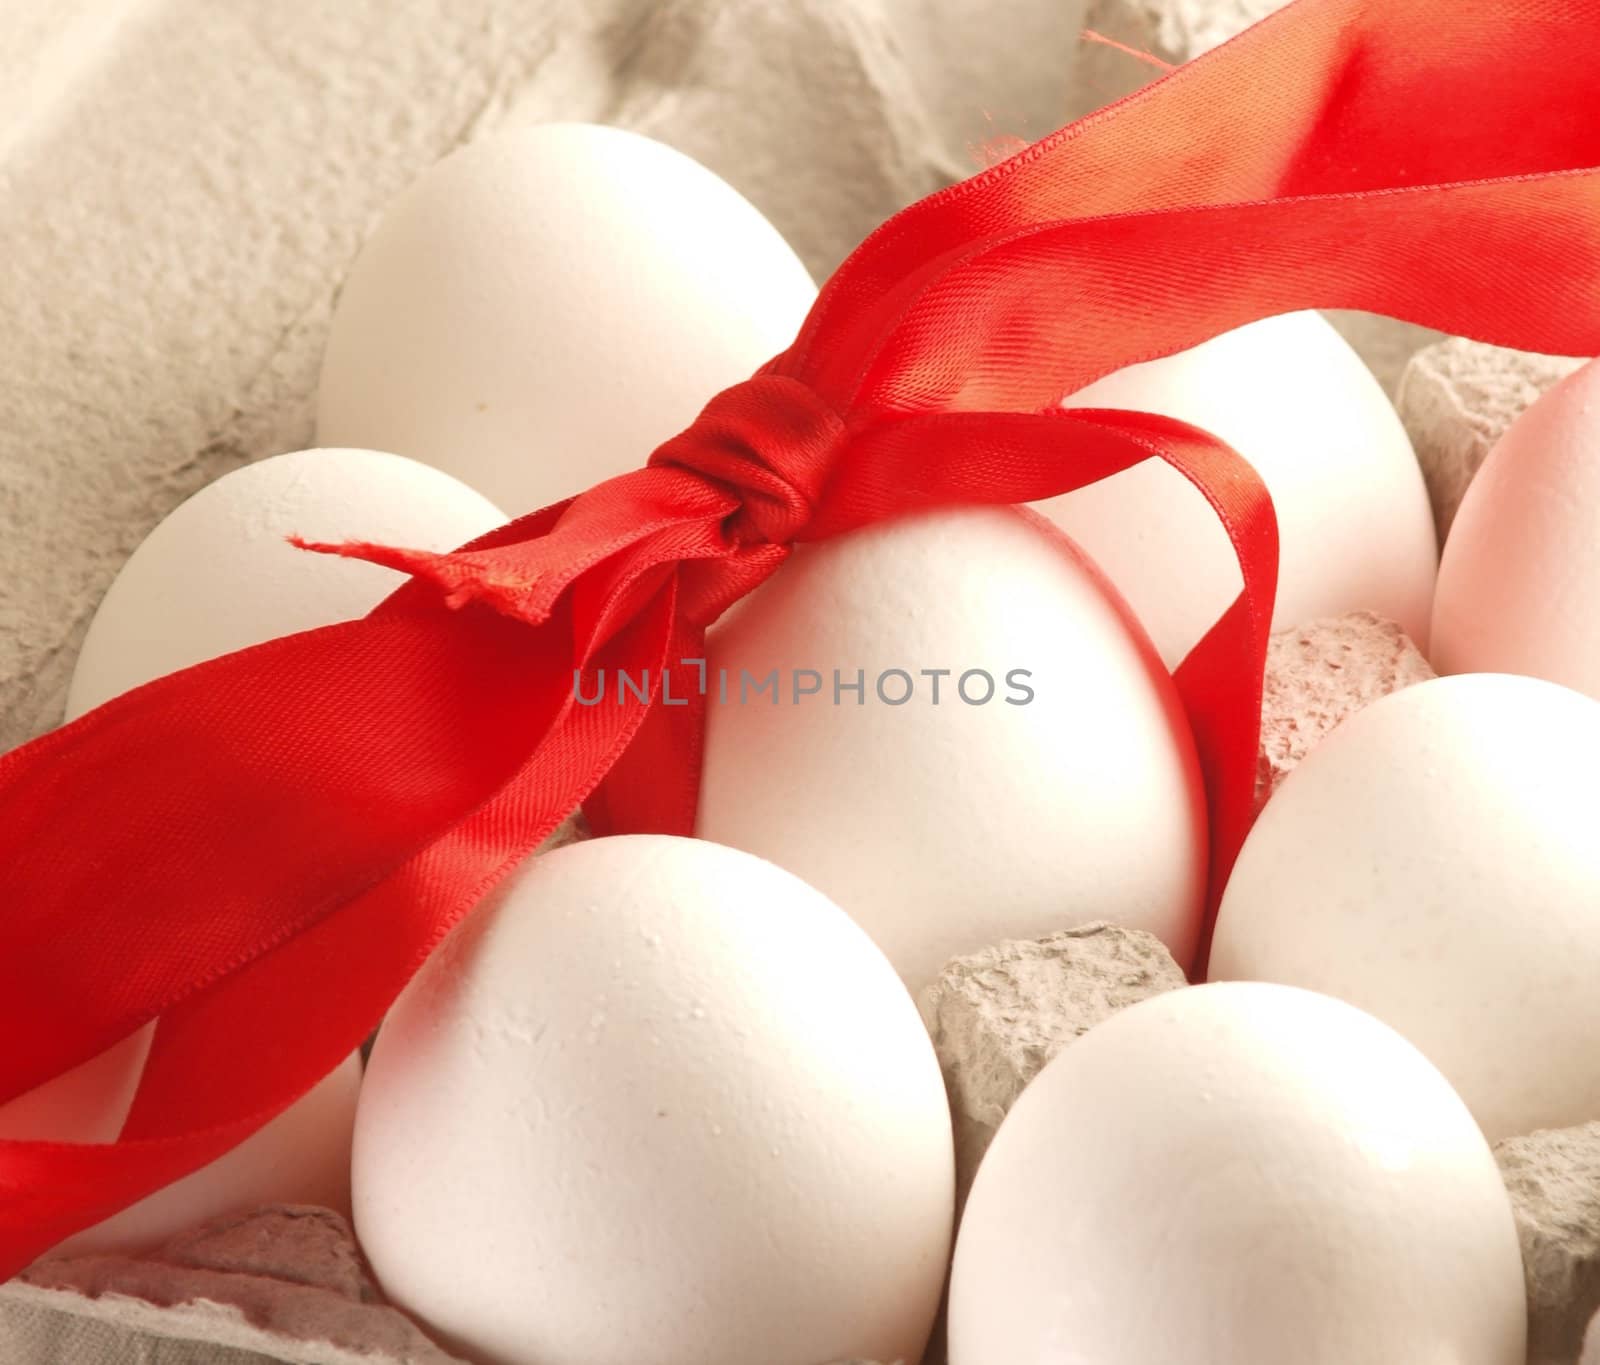 Eggs with red bow by Arvebettum